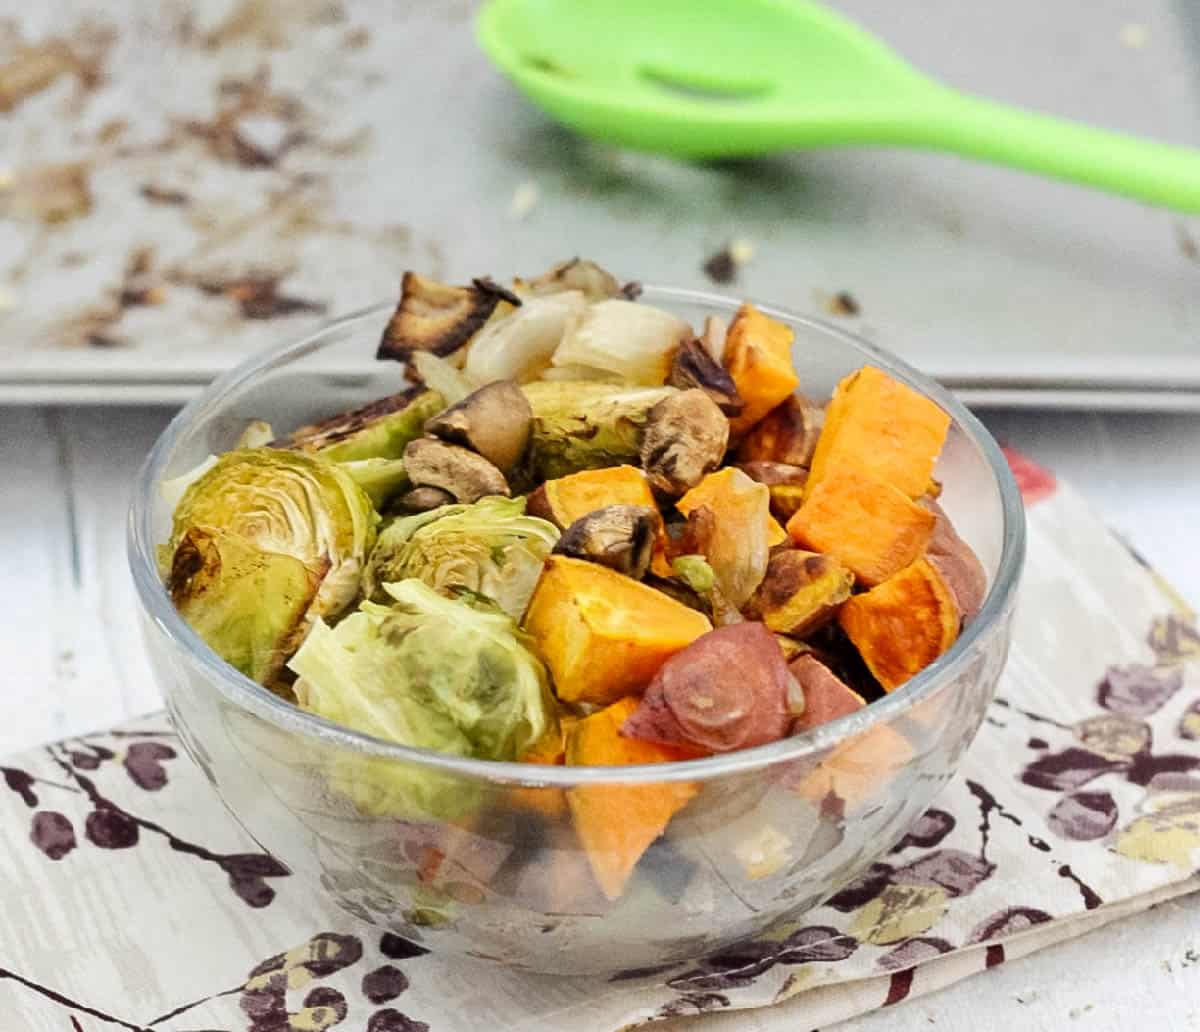 clear bowl of roasted vegetables on a floral napkin in front of an empty baking sheet